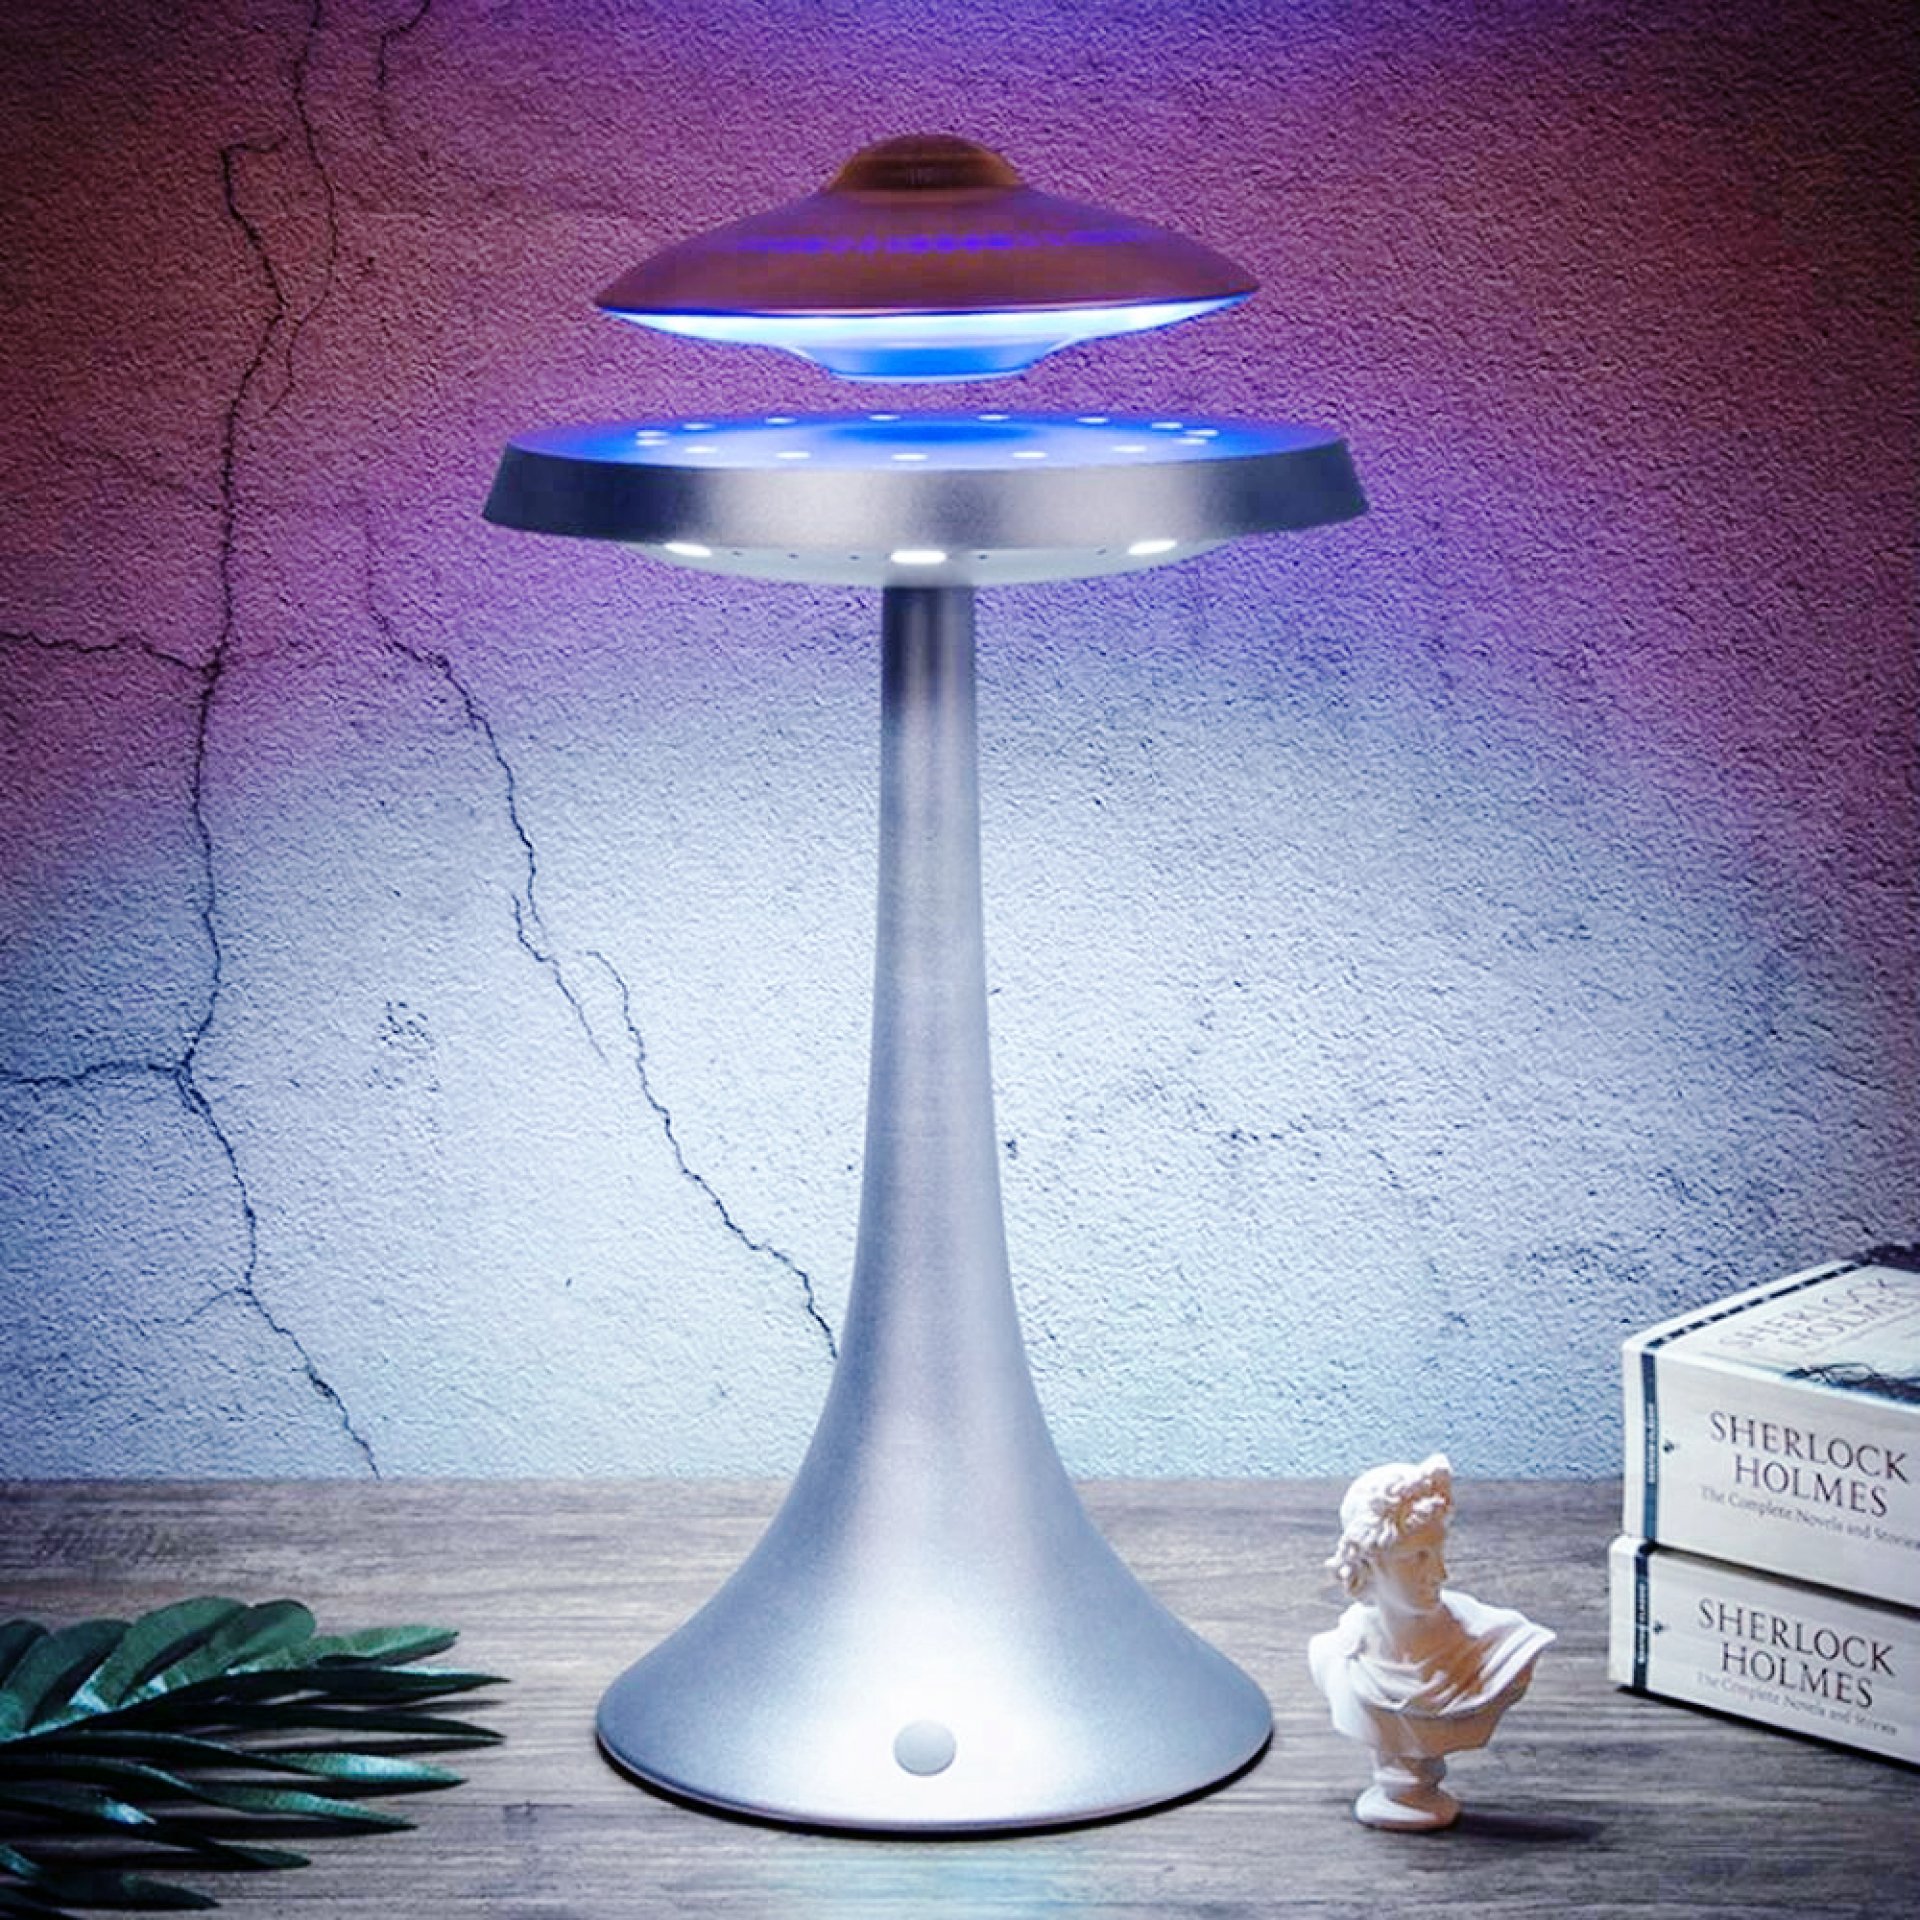 Ufo Lamp - UFO 3D LED Lamp - In today's video, we made an amazing ufo